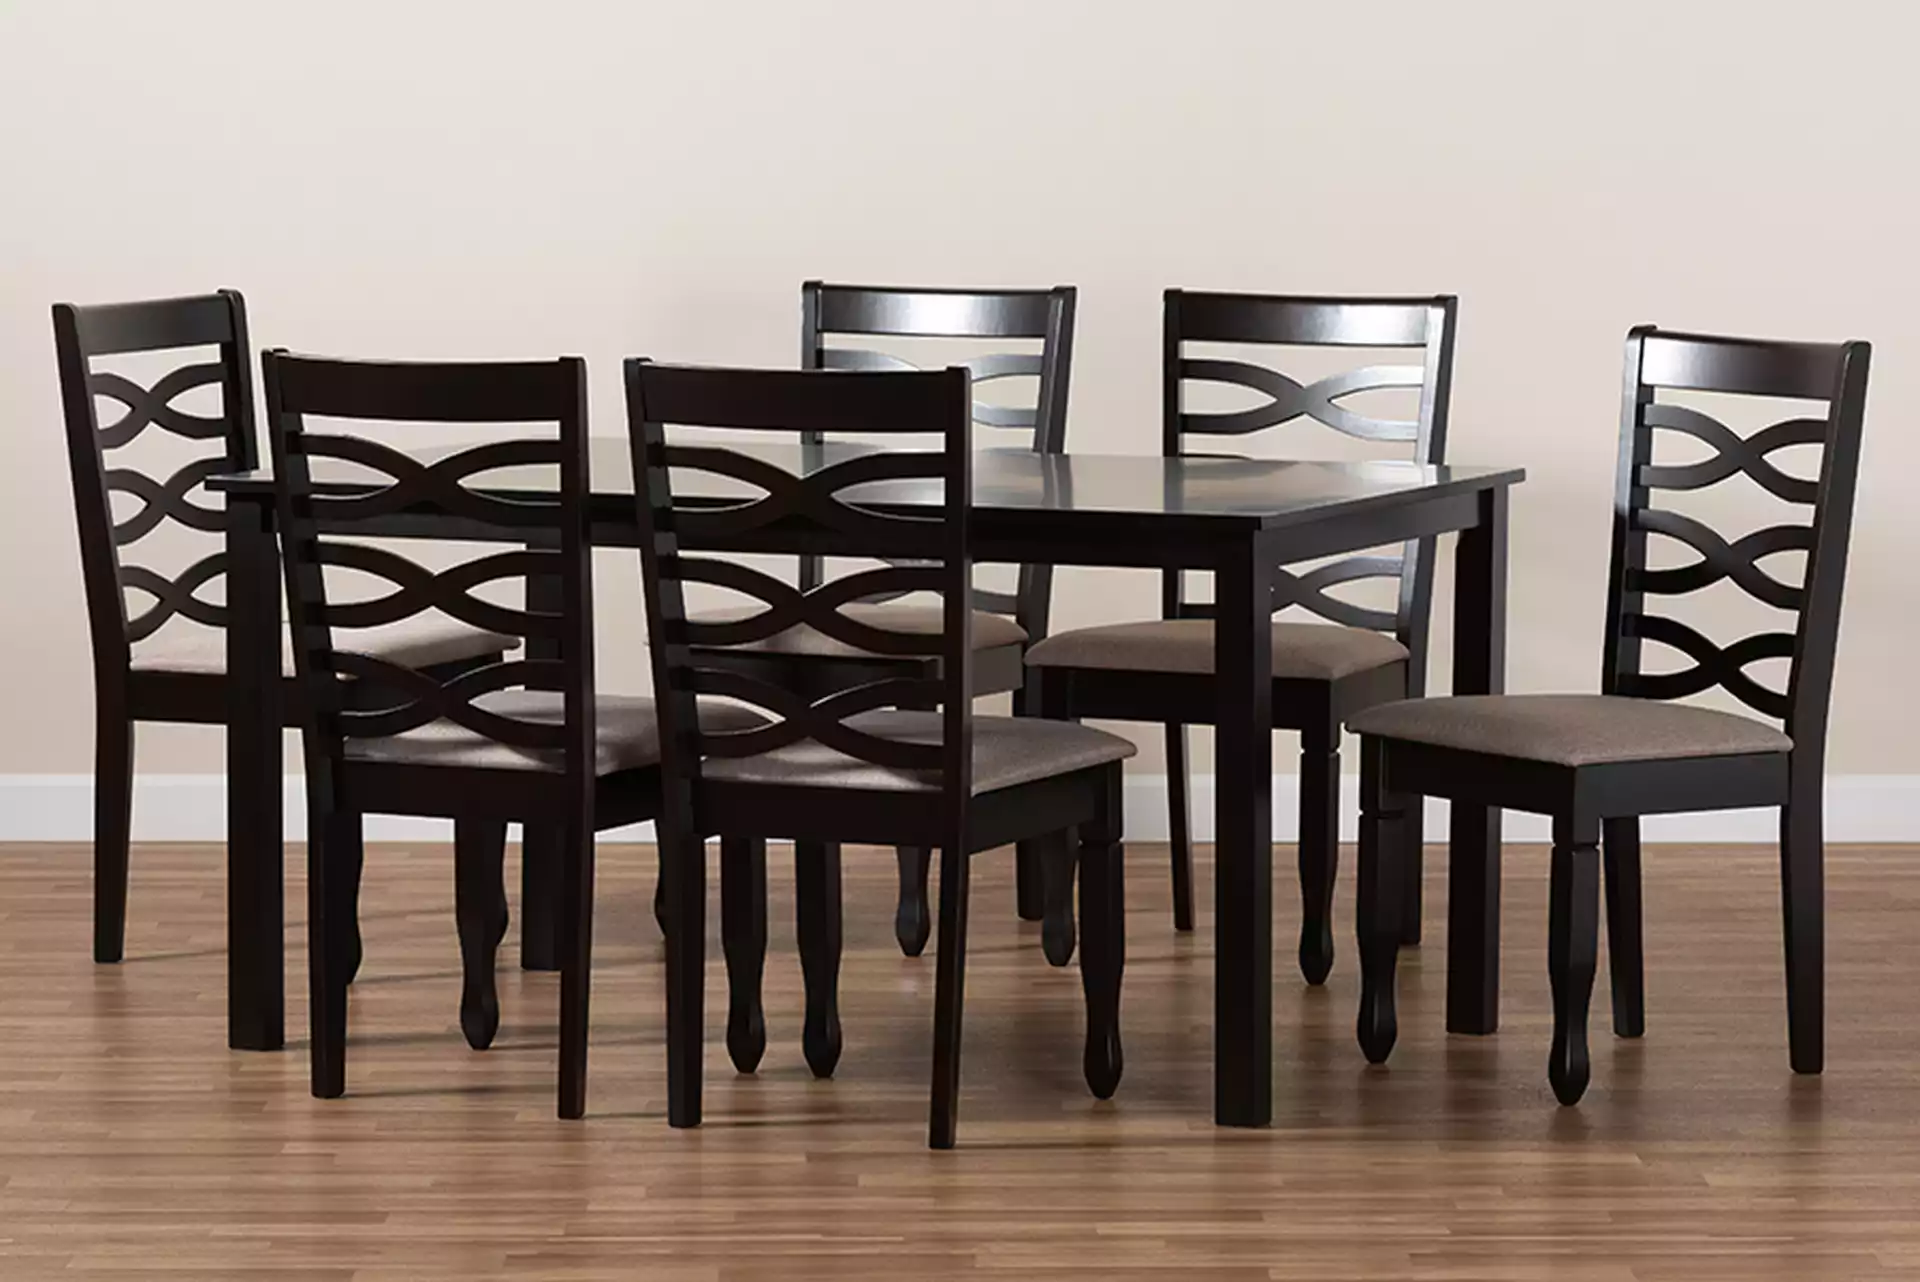 Lanier Modern and Contemporary Sand Fabric Upholstered Dark Brown Finished Wood 7-Piece Dining Set